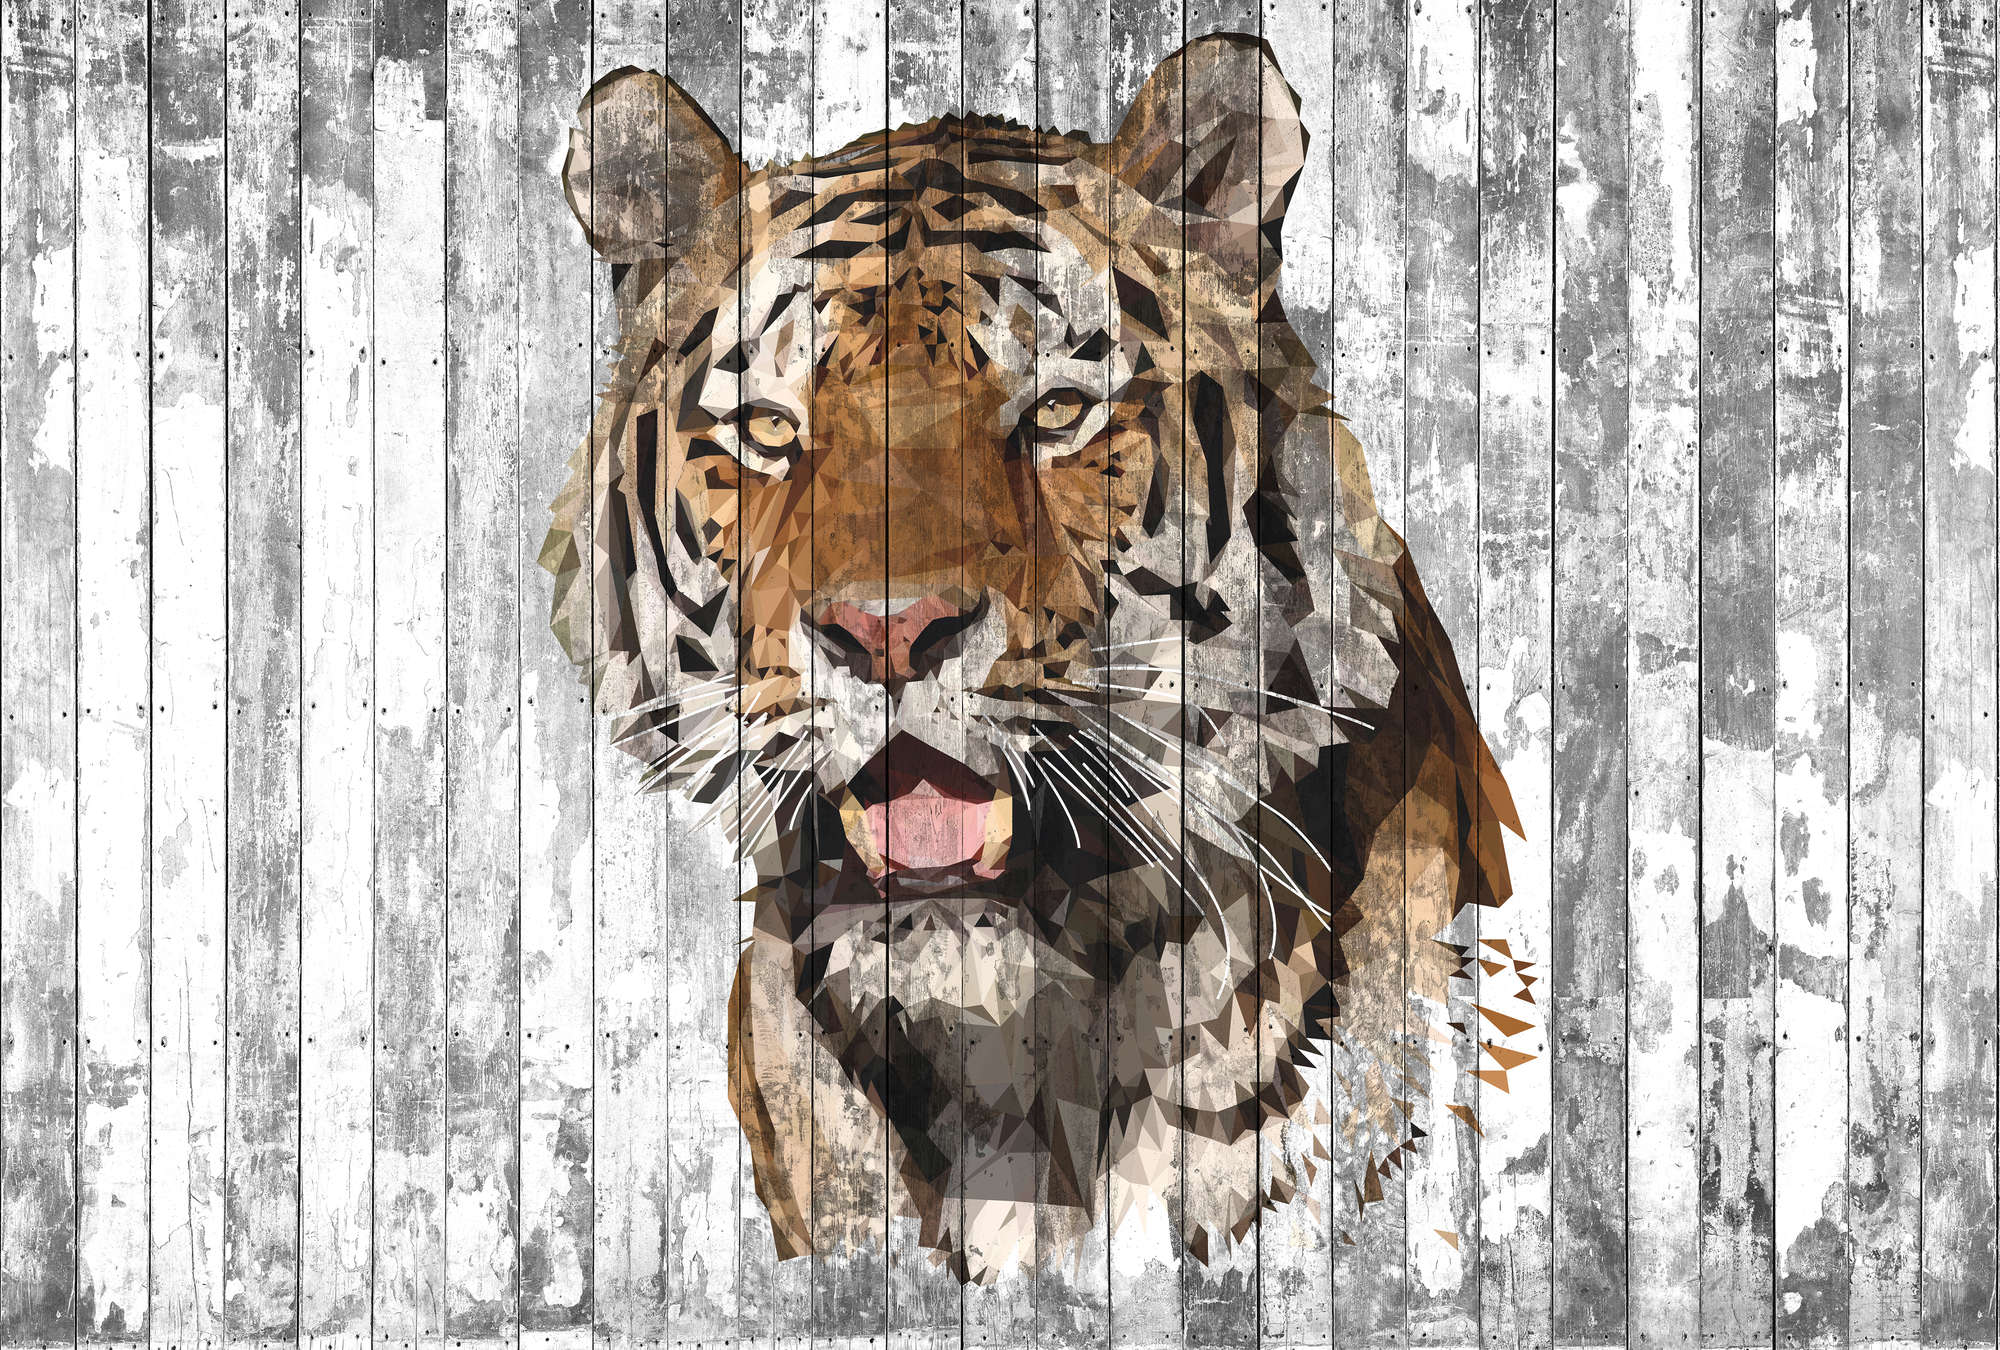             Tiger mural in polygon style for youth room - brown, grey, white
        